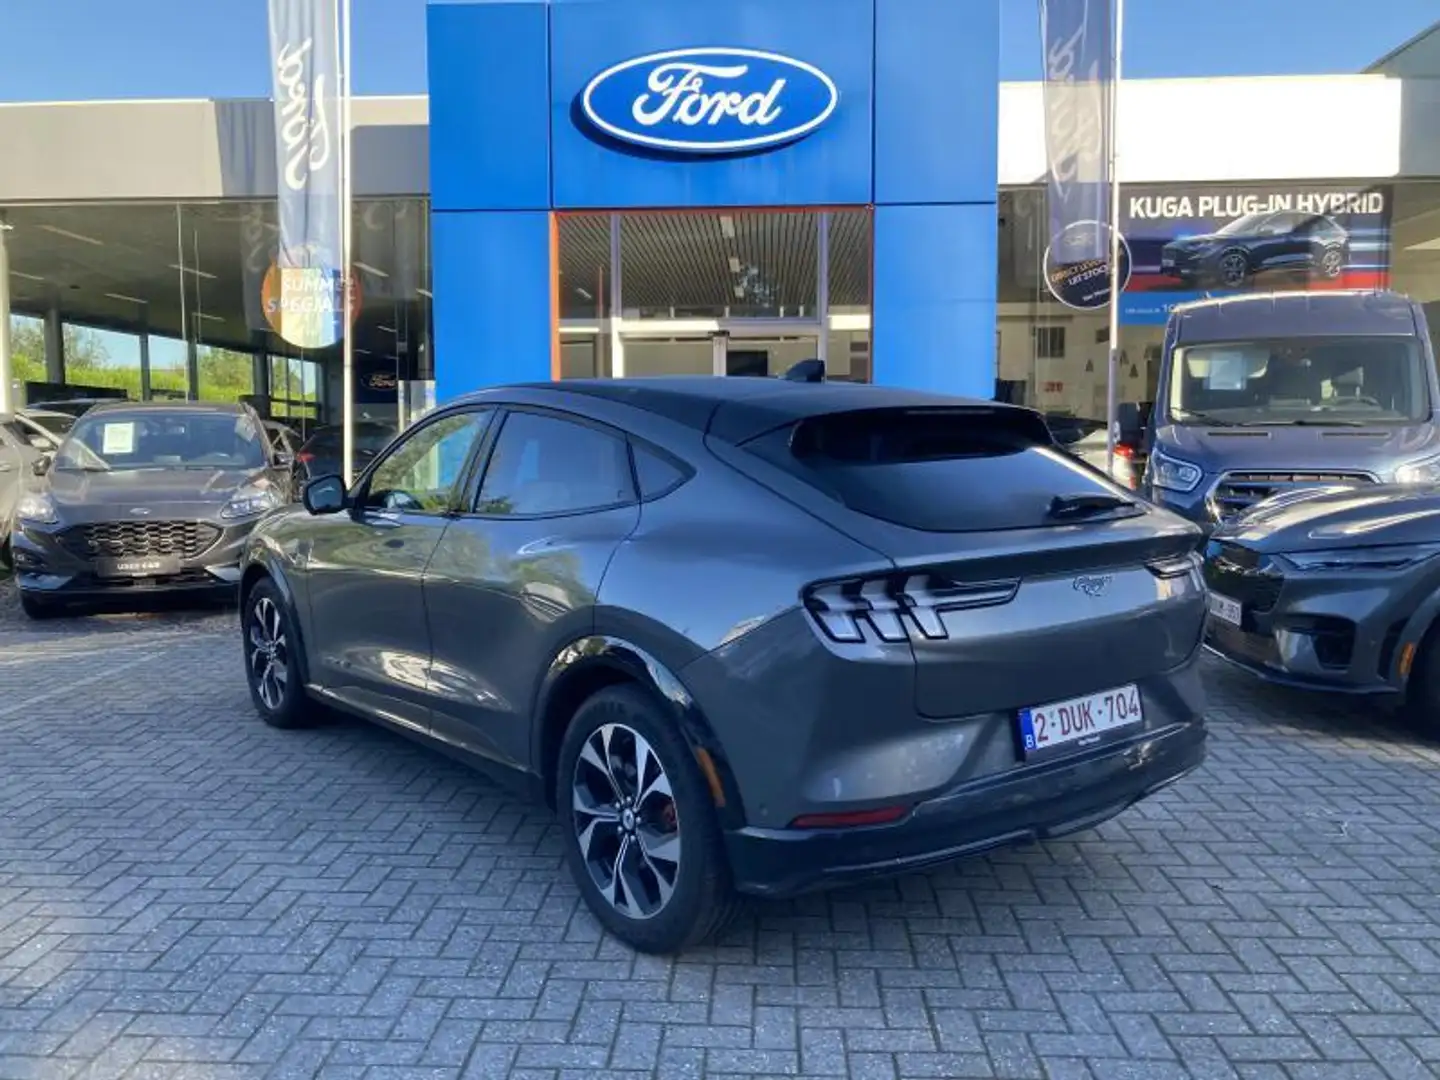 Ford Mustang Mach-E Premium RWD 99kWH|€599/m|Technology Pack|600 Range Grey - 2